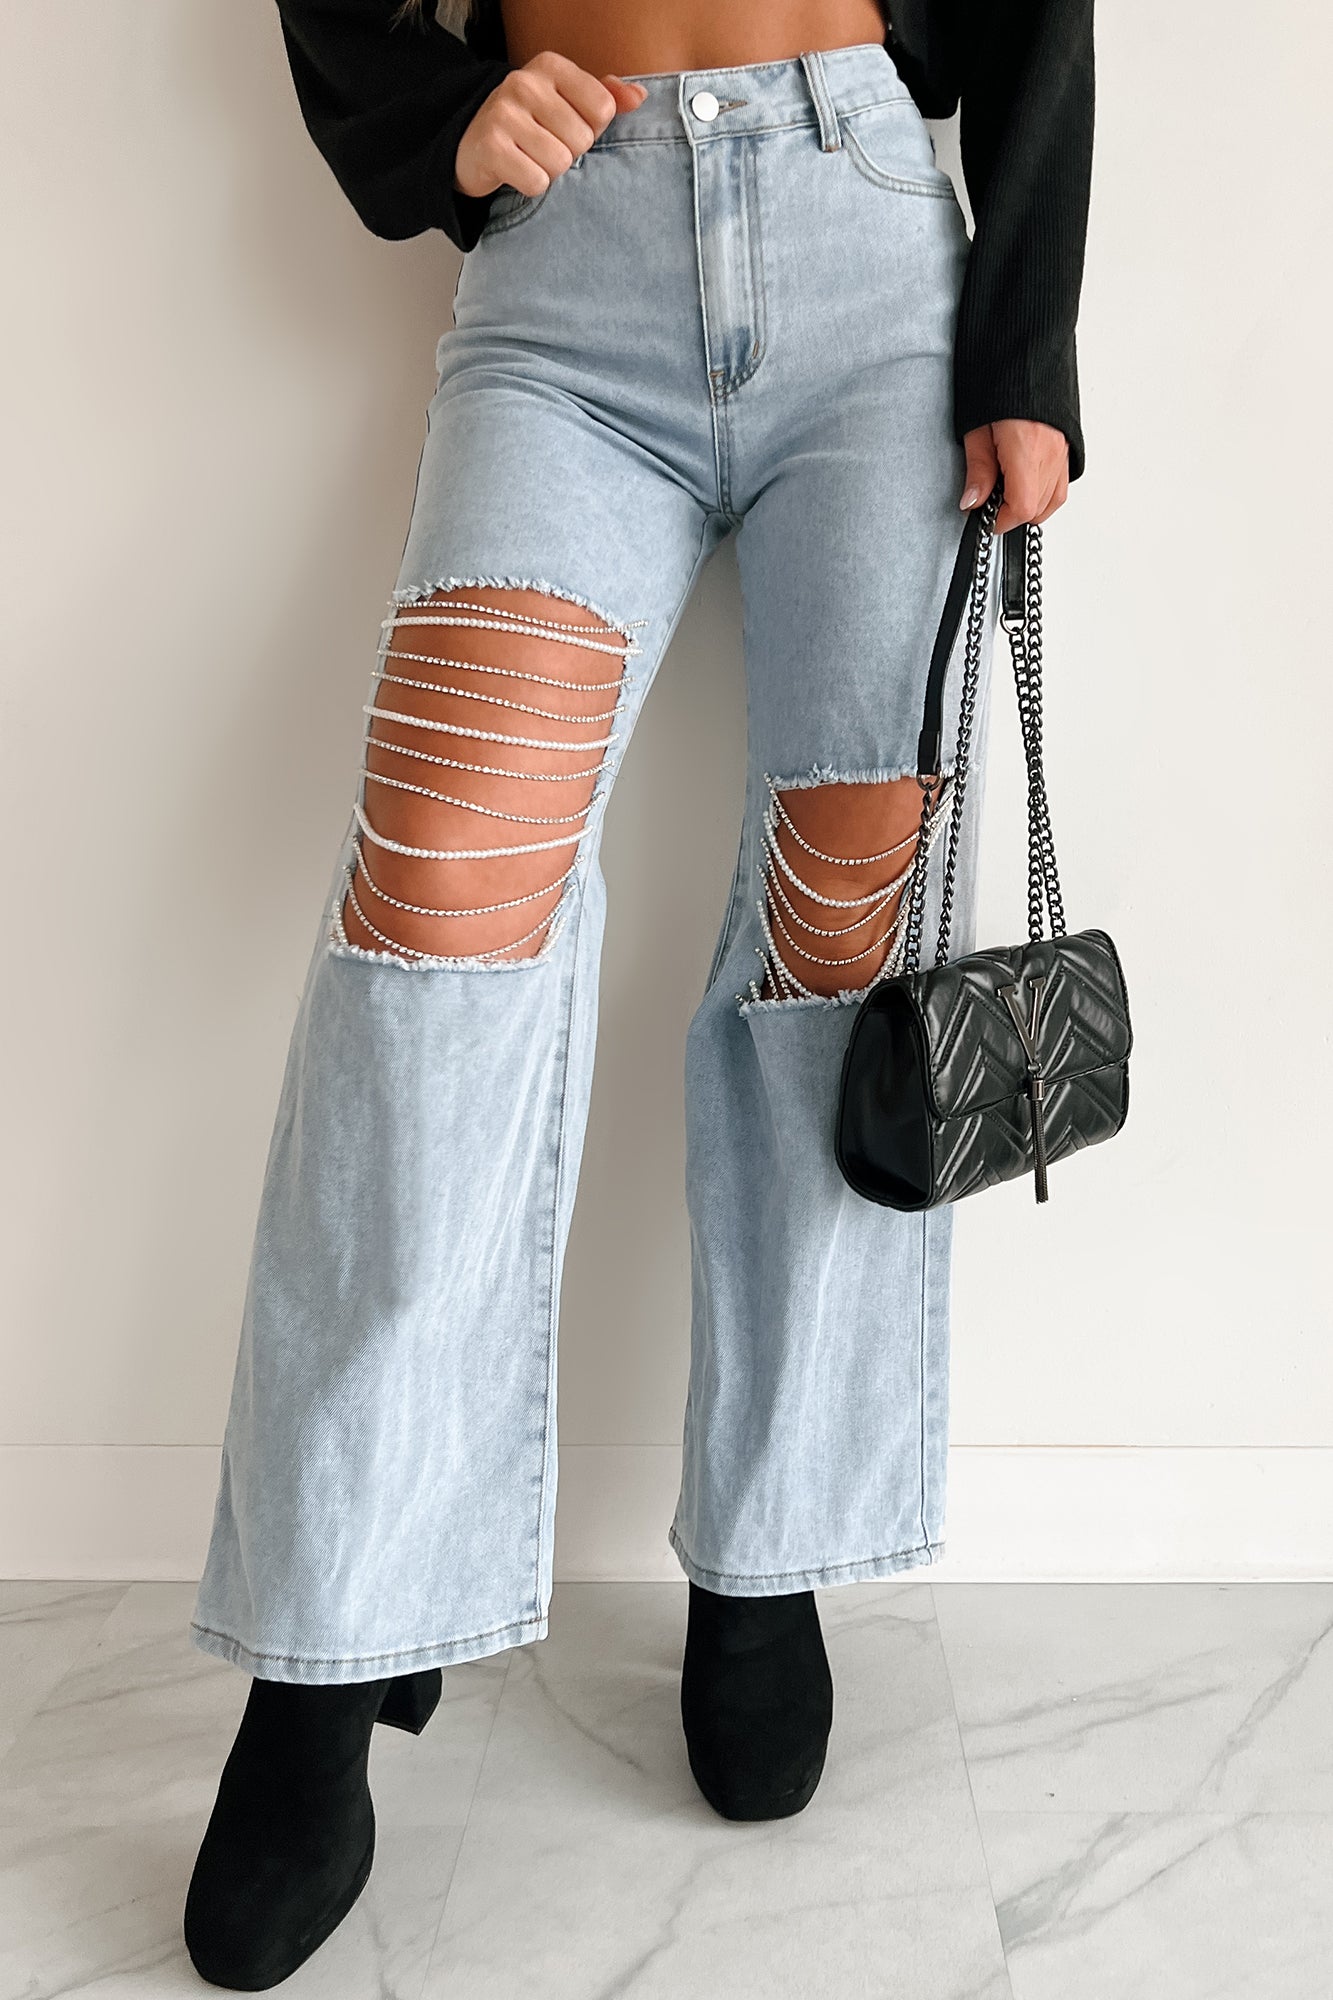 Light Wash Jeans with Rhinestone Leg Detail - Trader Rick's for